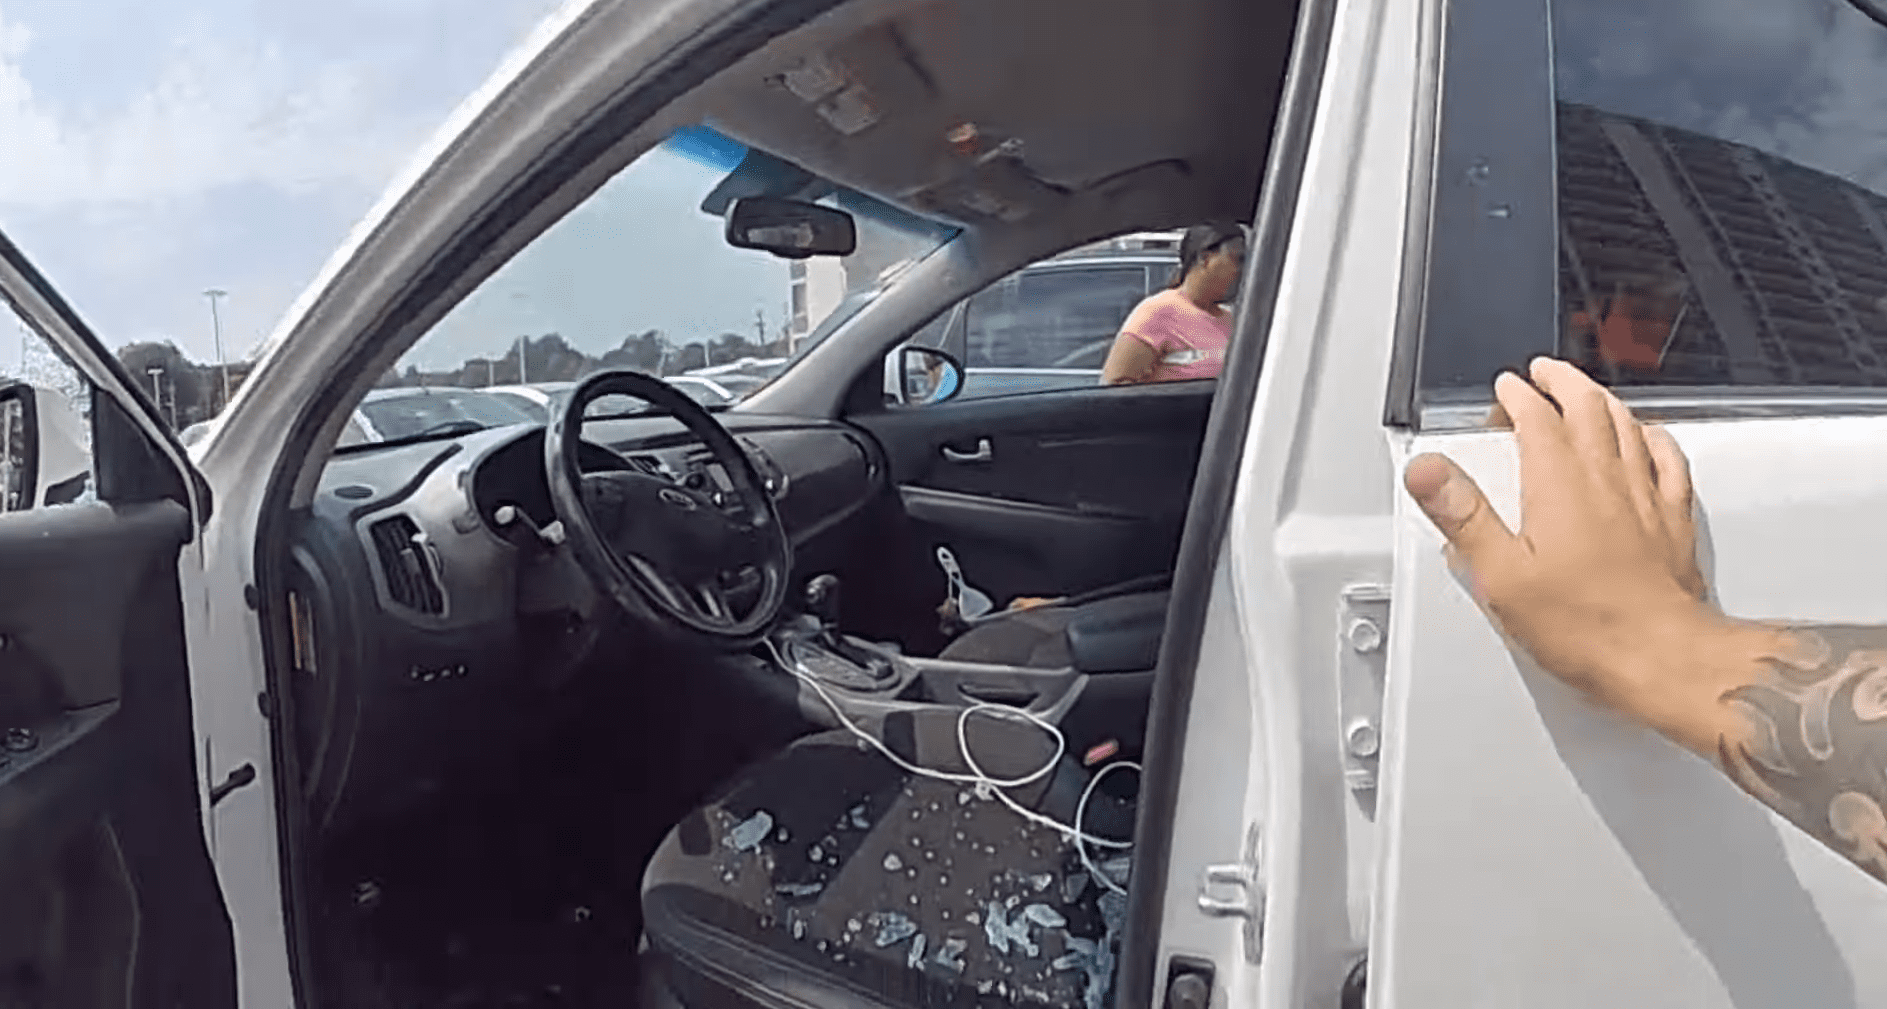 A police officer opening the front door of a car after smashing the window open, with glass pieces on the seat | Source: youtube.com/Euclid Police Department